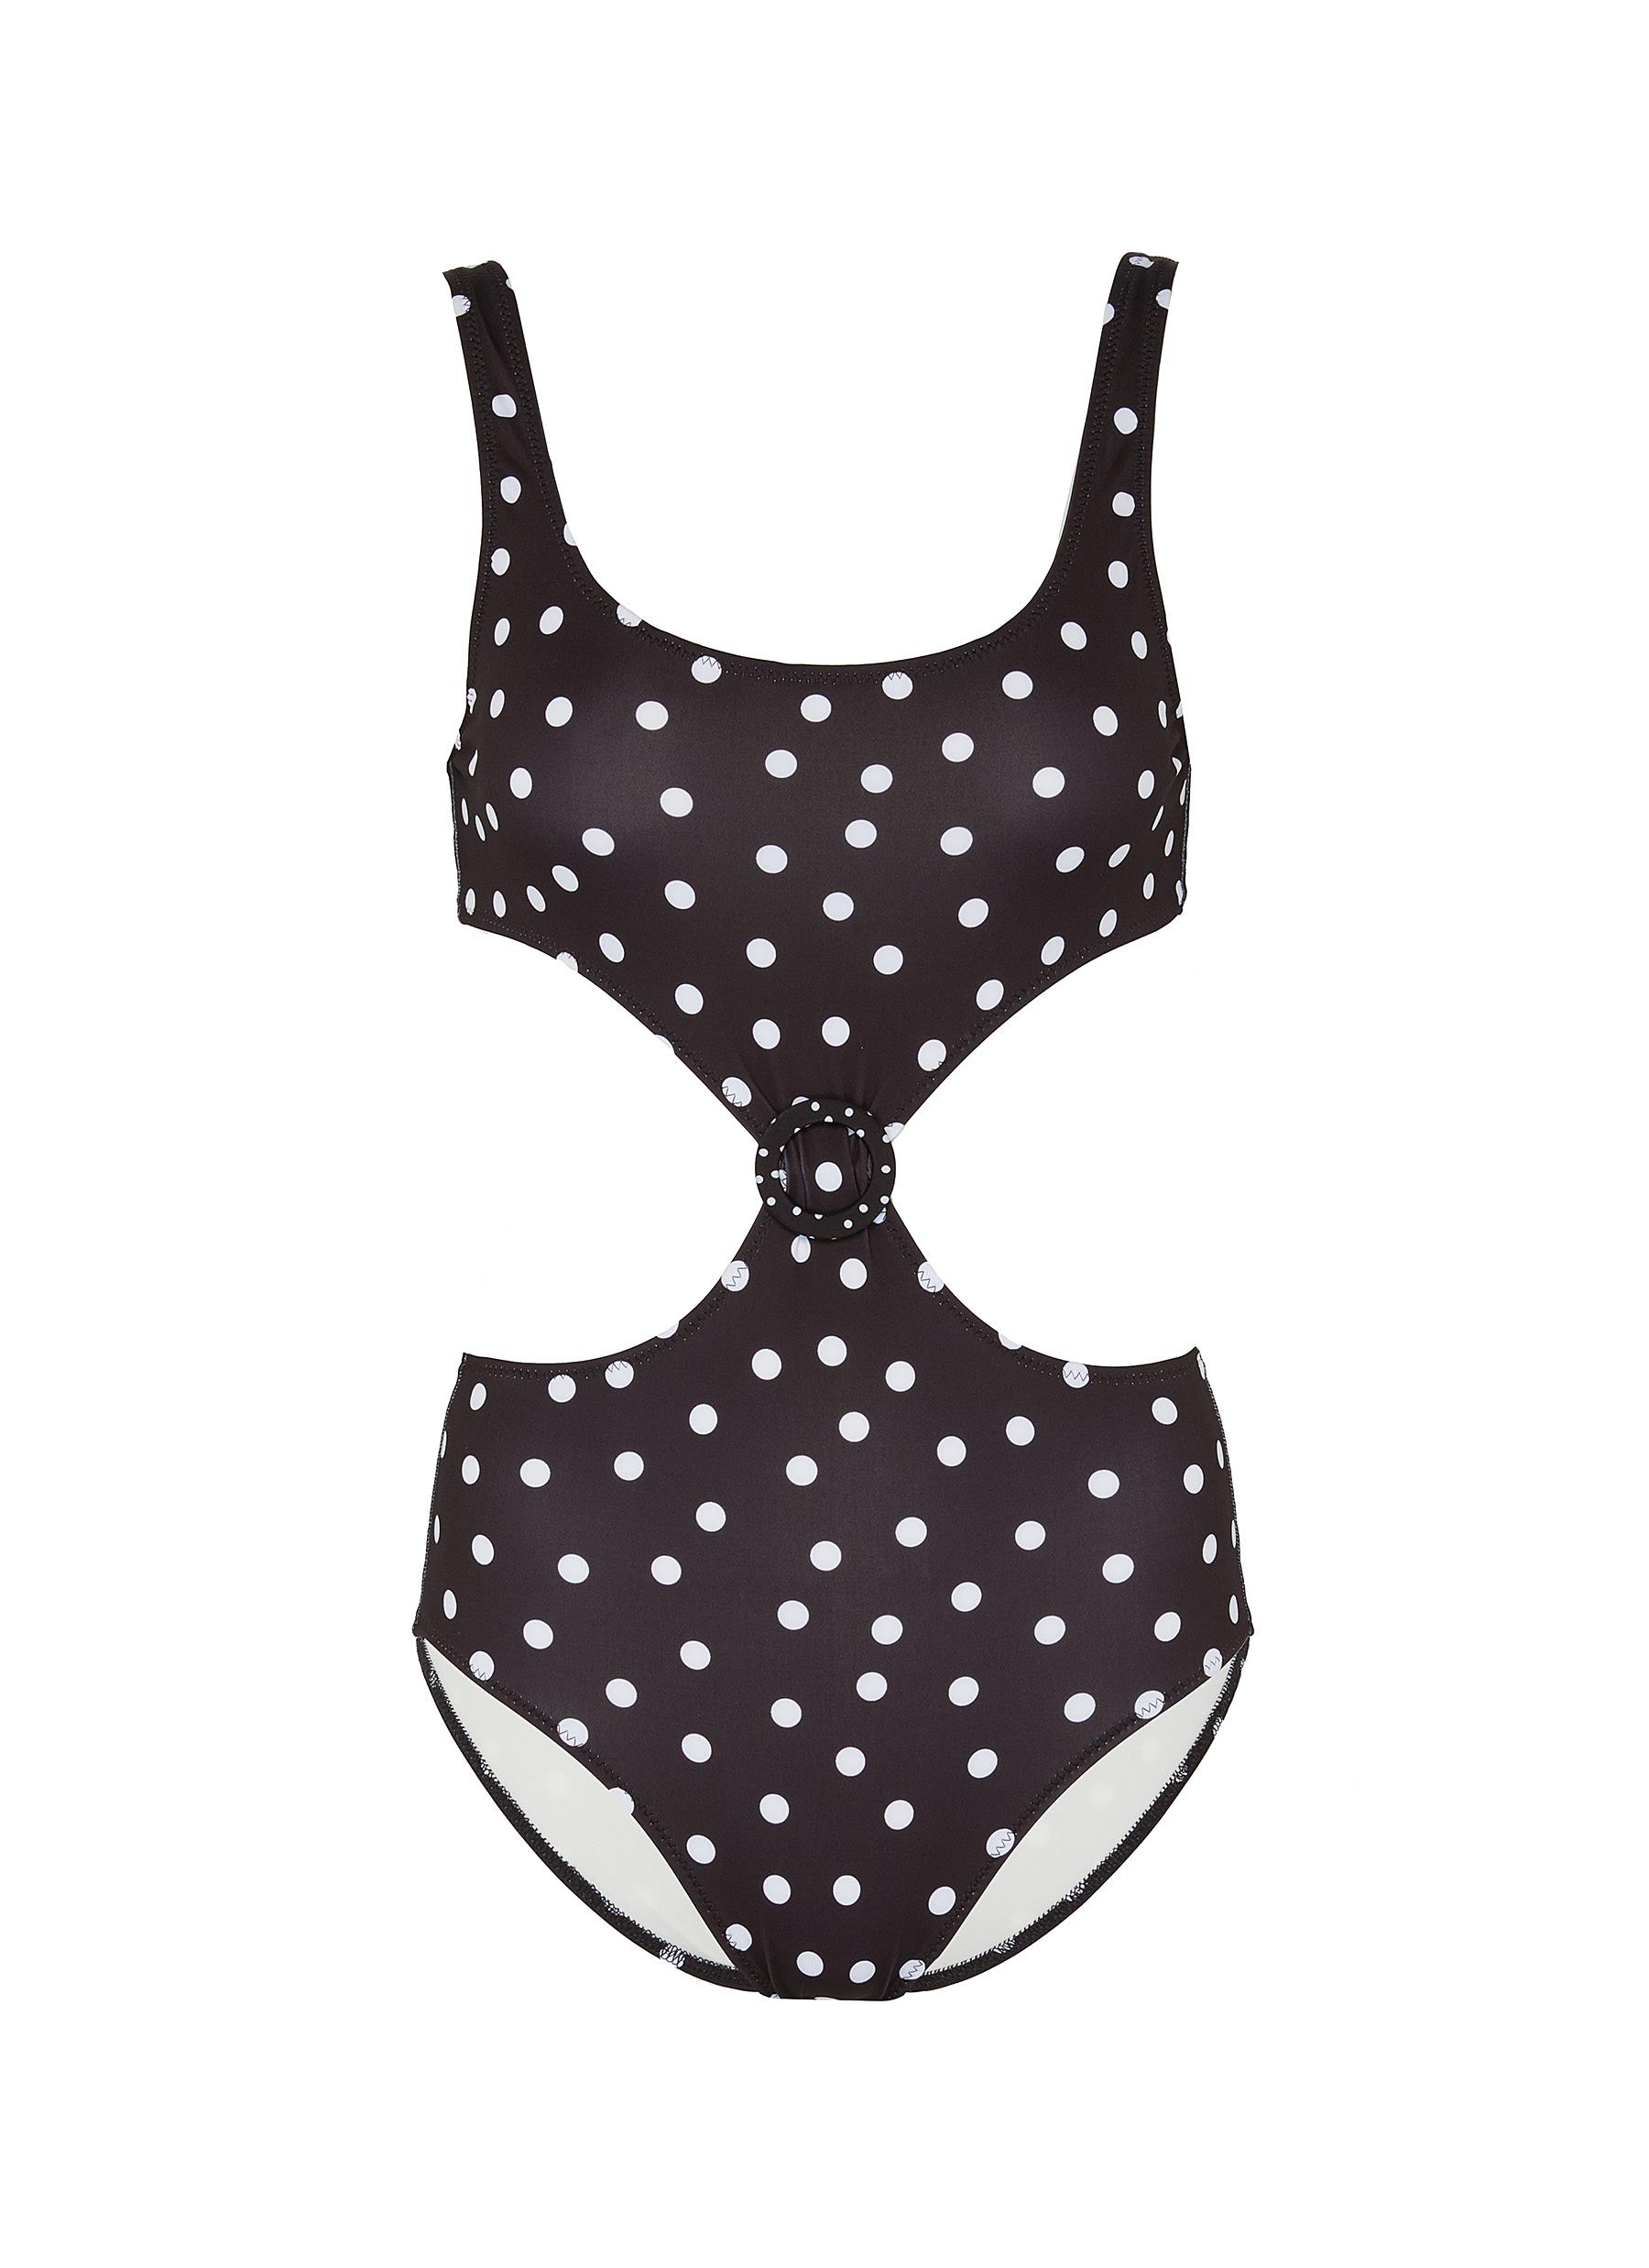 "The Bailey cutout waist polka dot print one-piece swimsuit by Solid & Striped